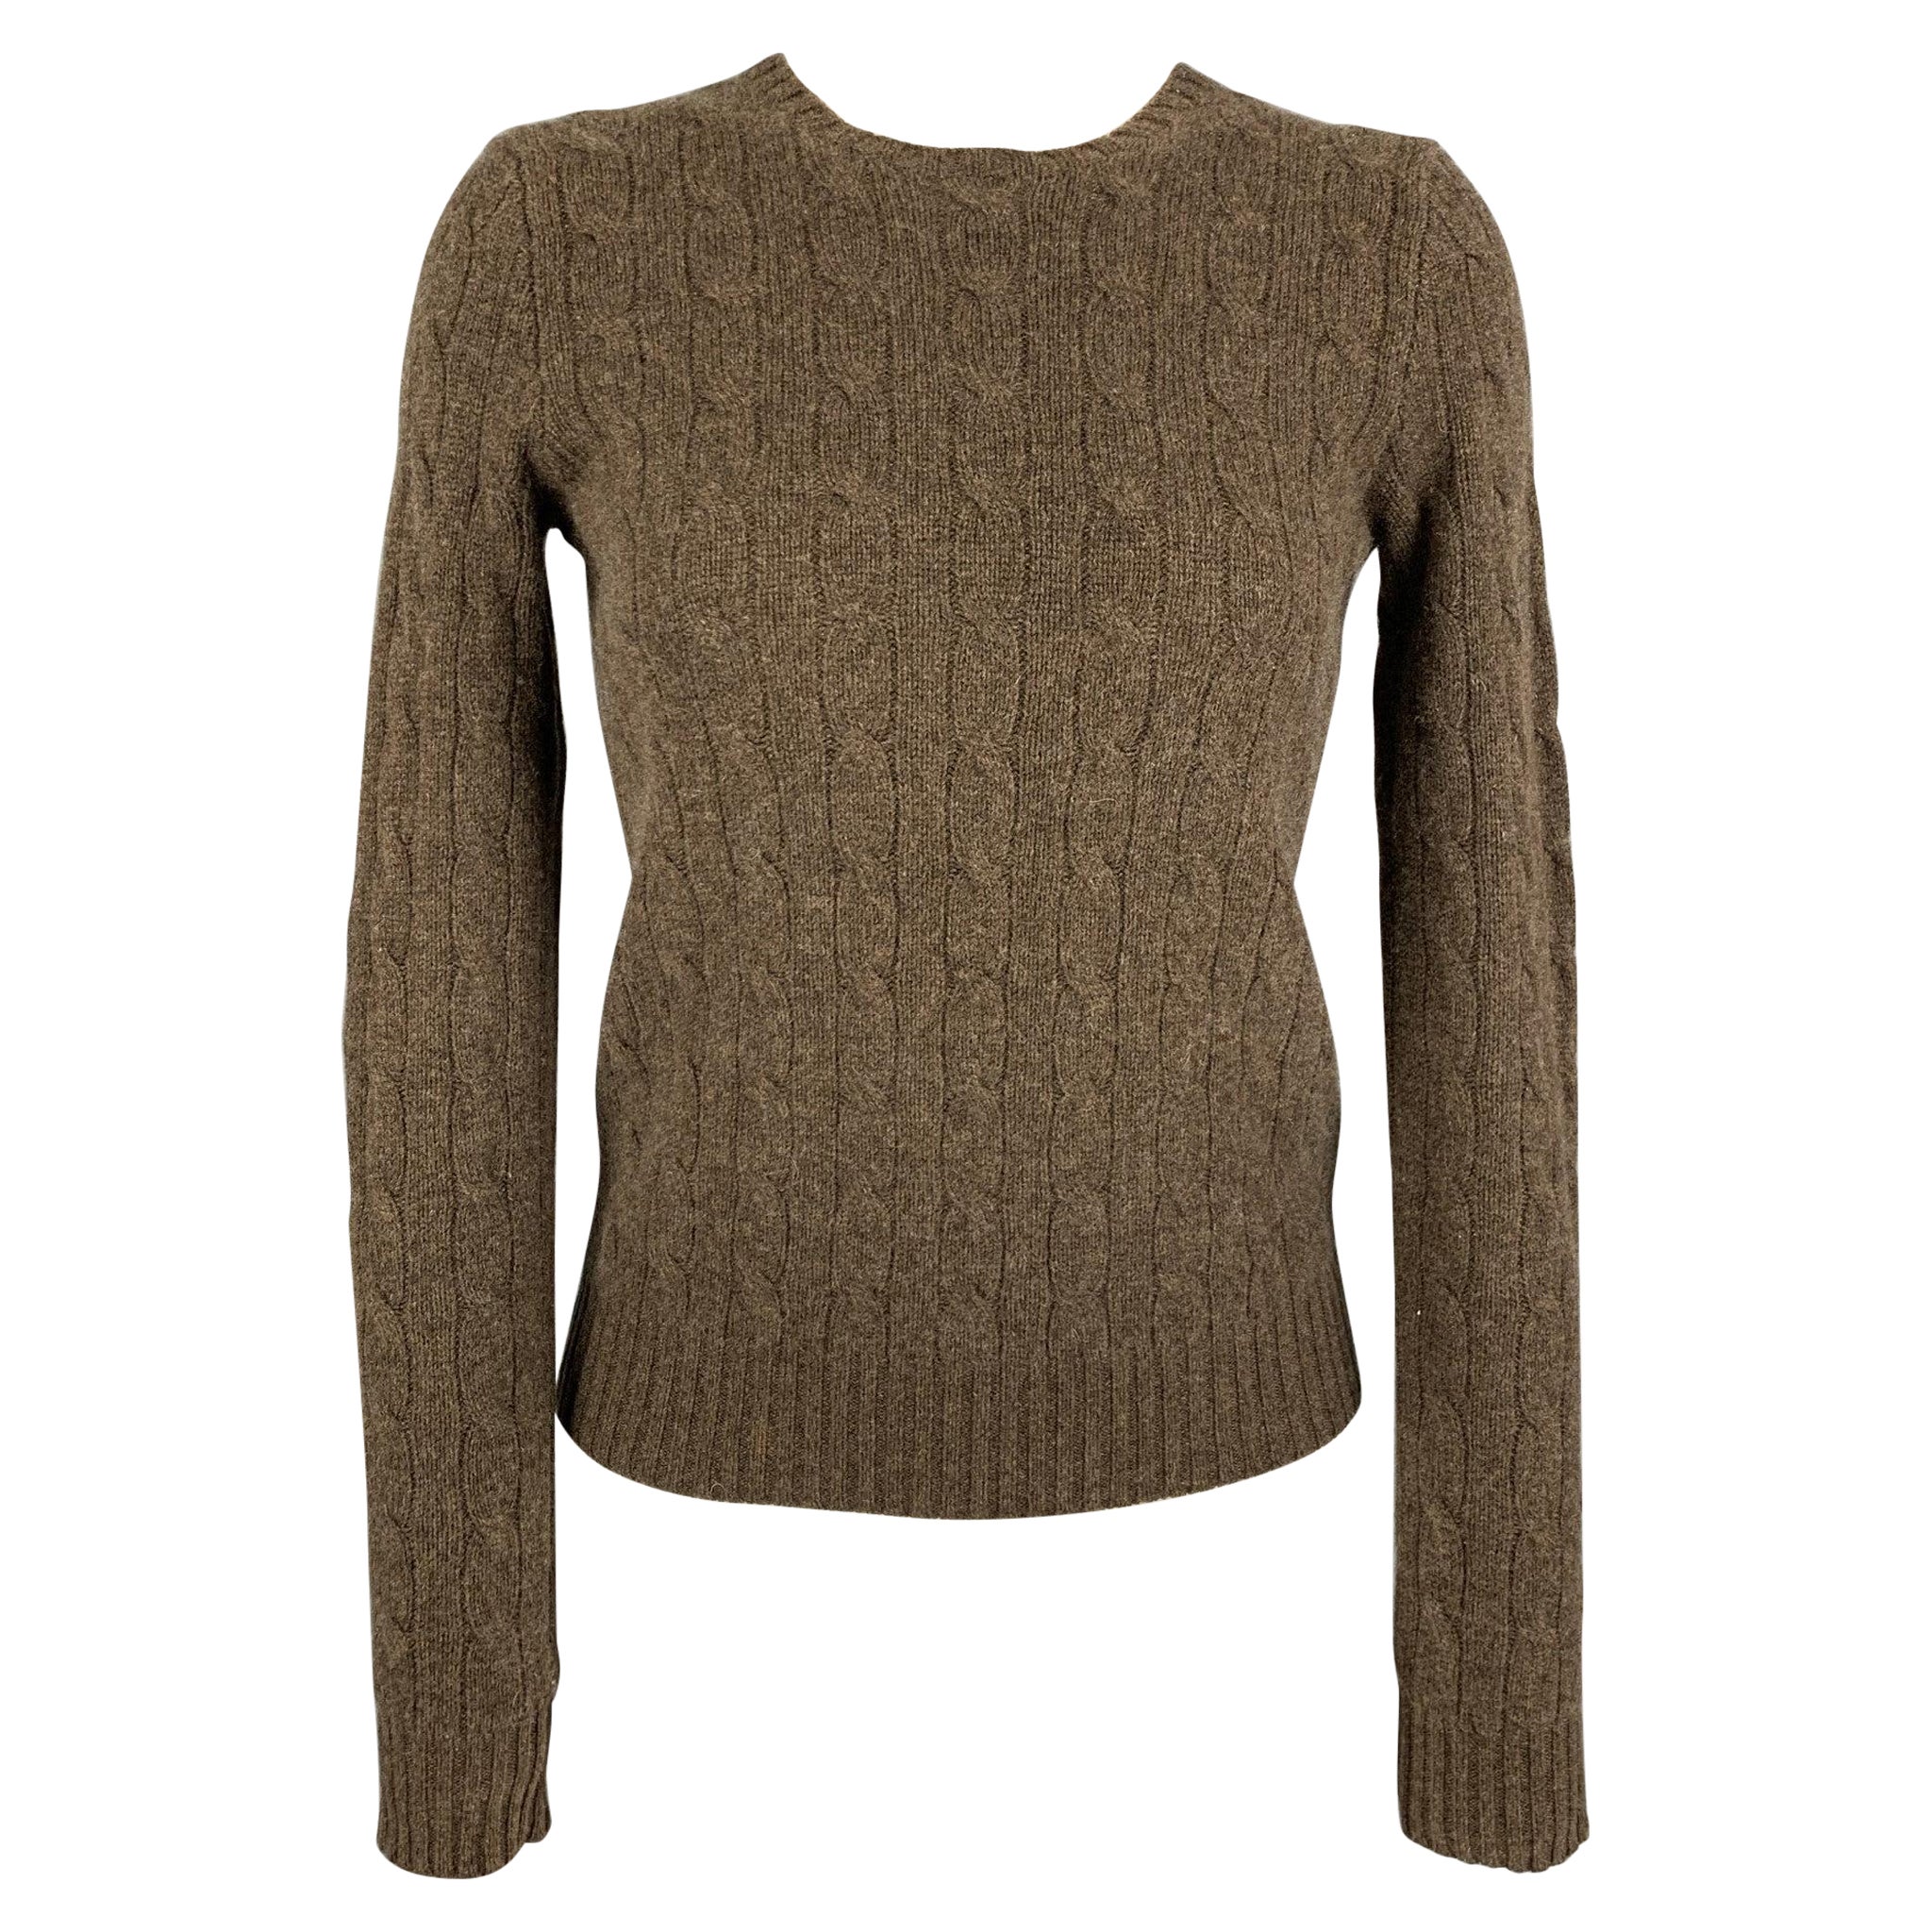 What is a cable knit sweater?